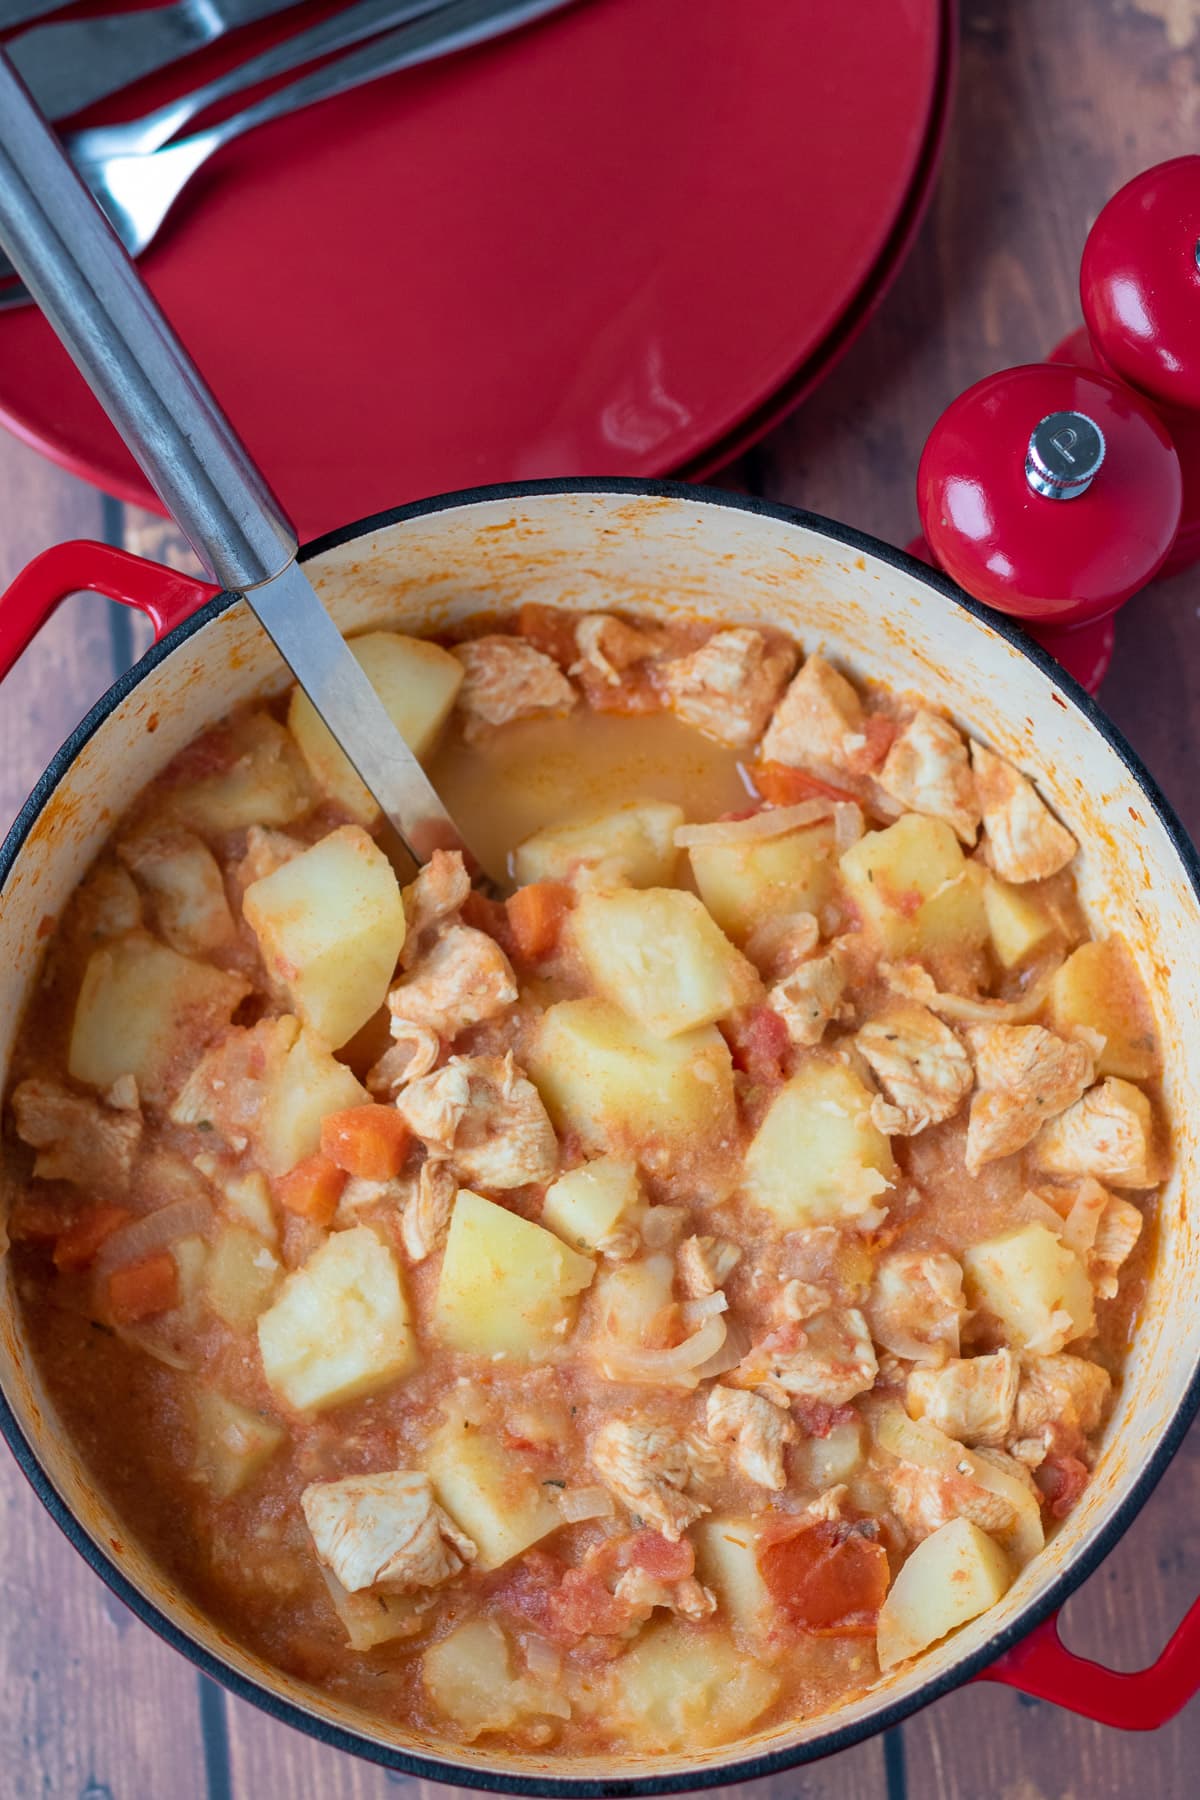 Overhead view of a casserole pot filled with chicken stew and tomatoes and potatoes. With a serving spoon in ready to serve.